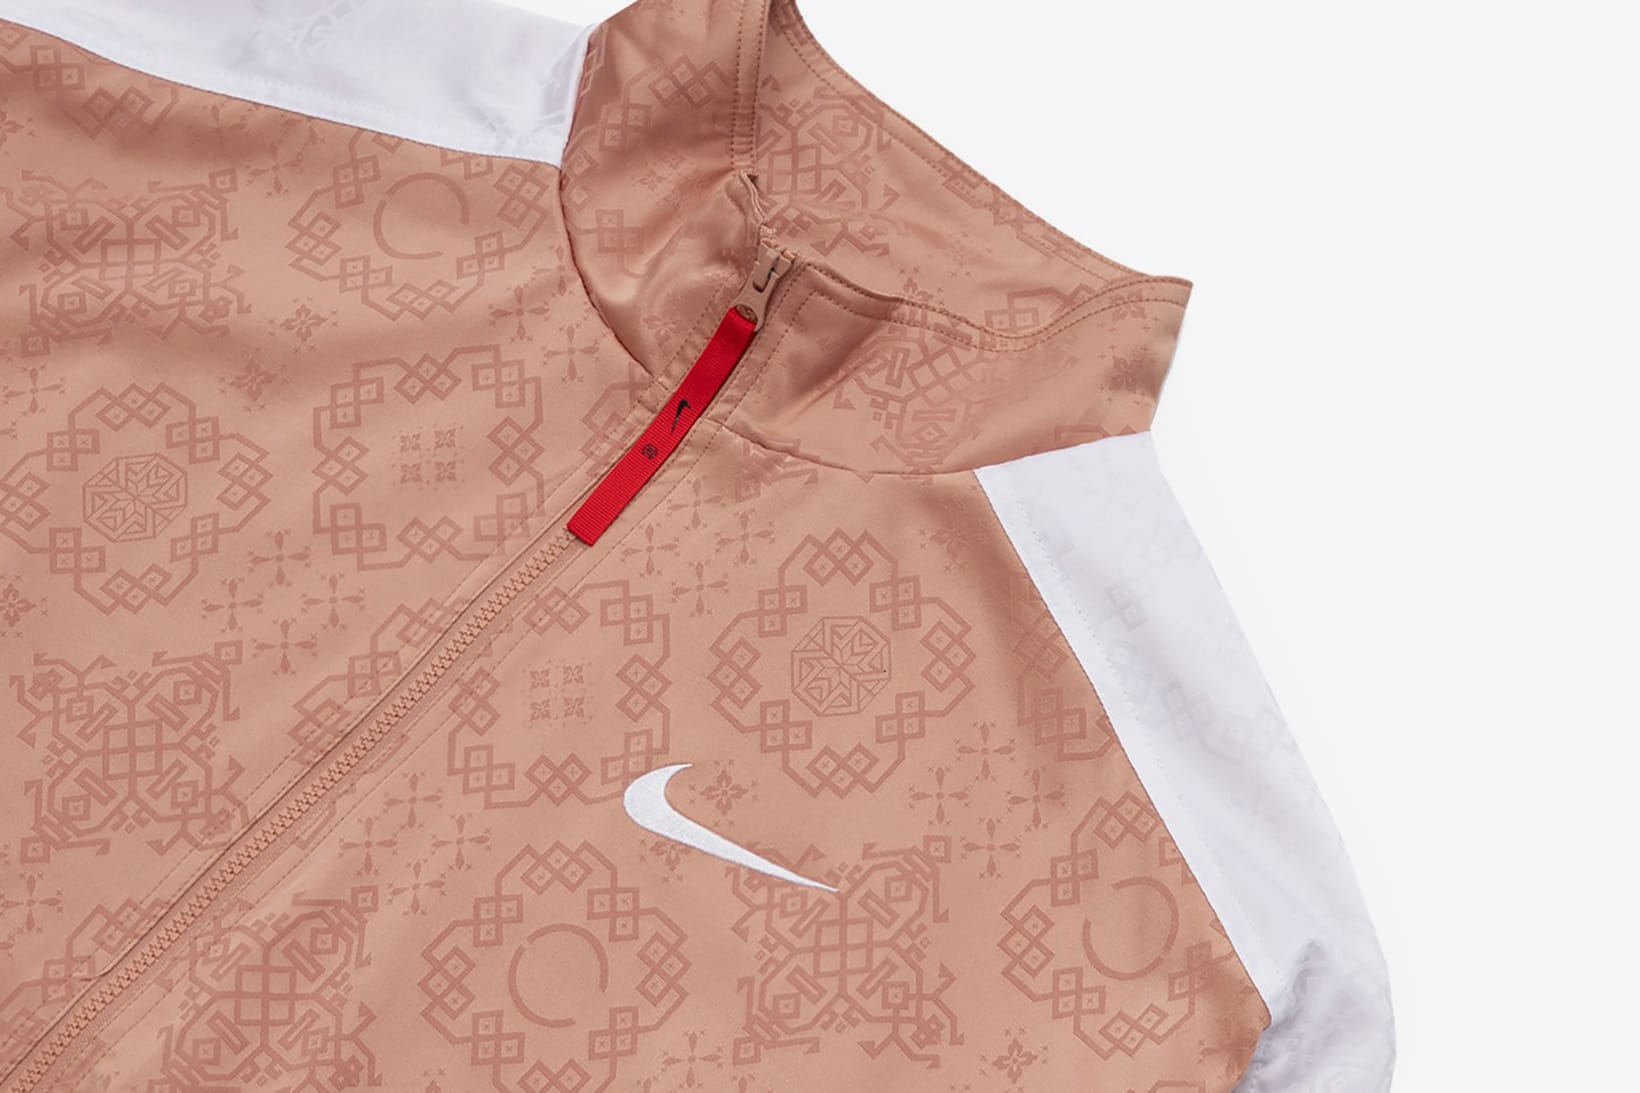 limited edition nike tracksuit